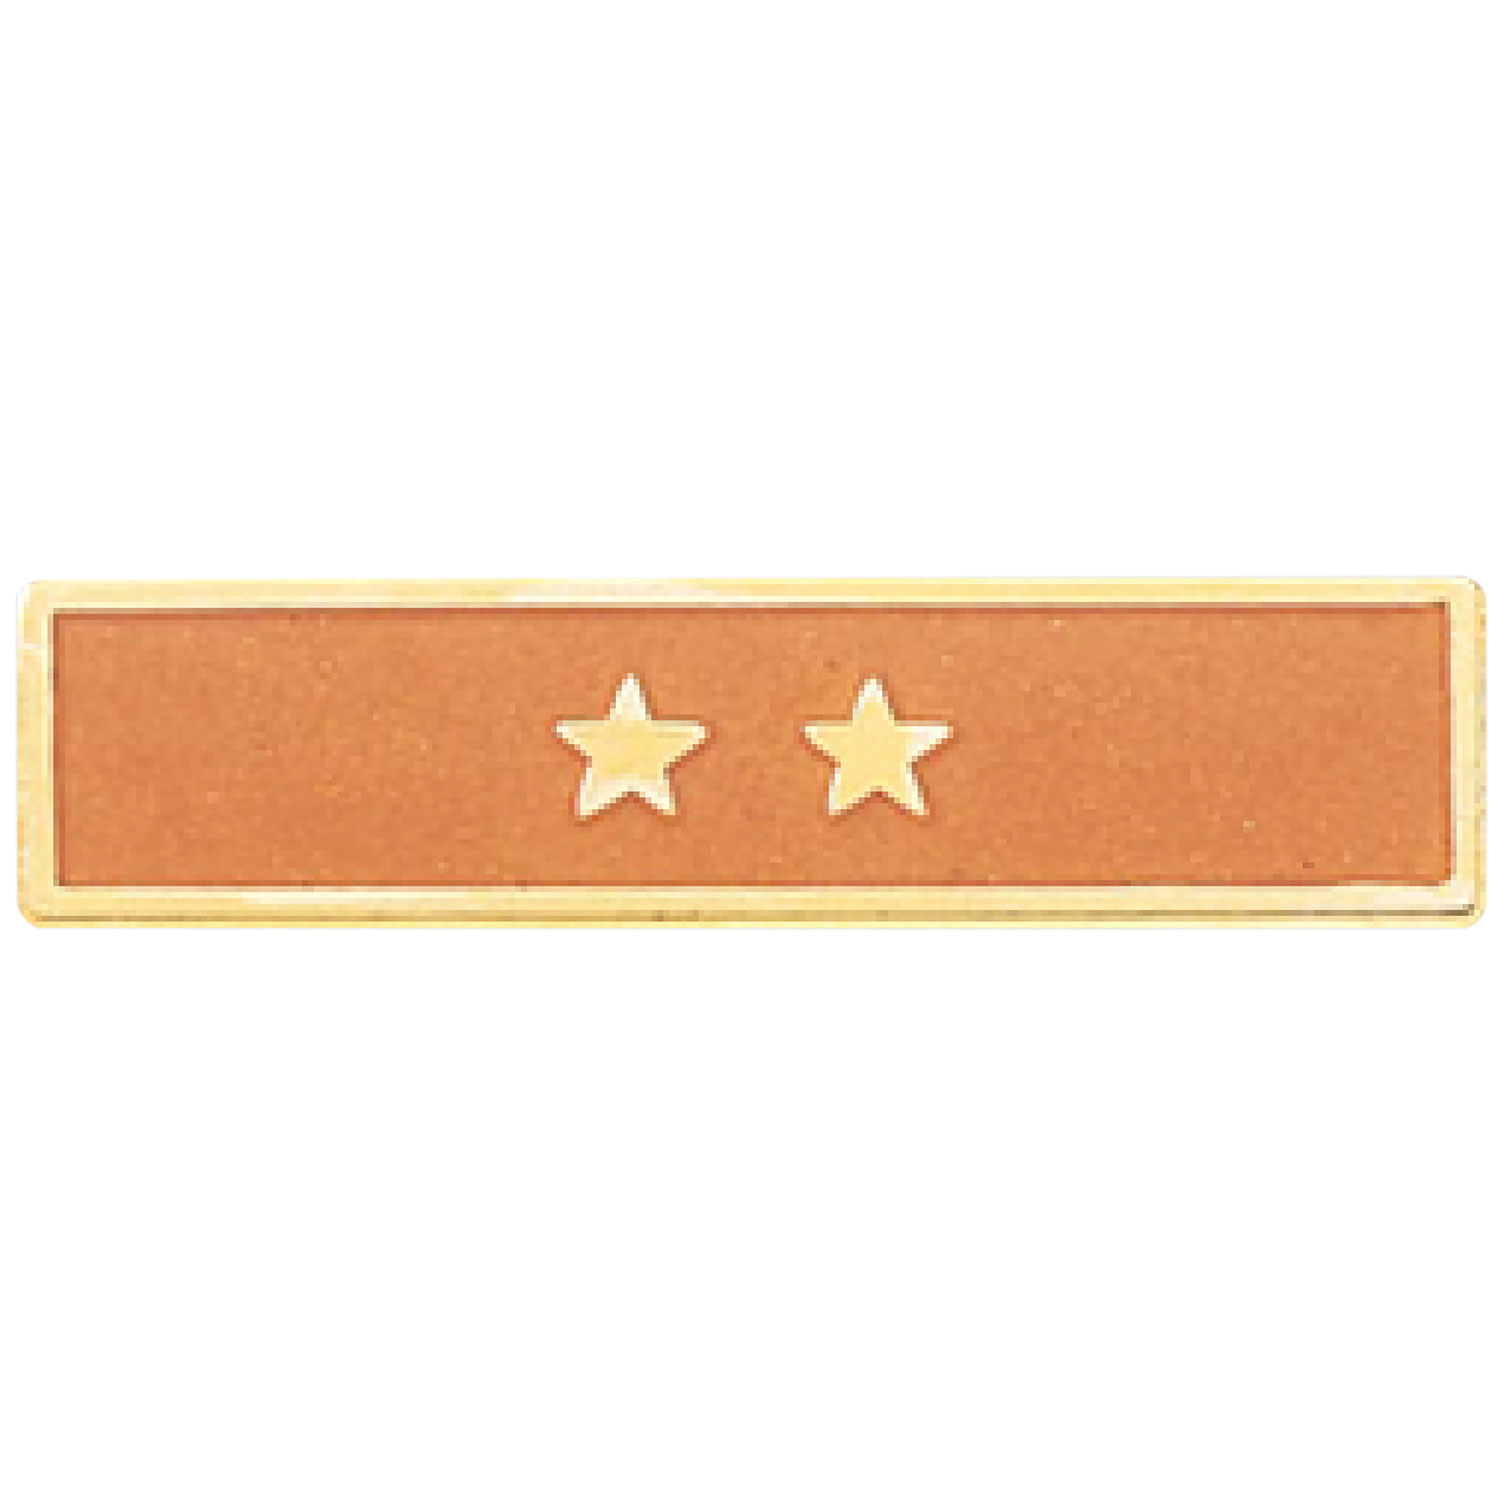 Two Star Commendation Bar